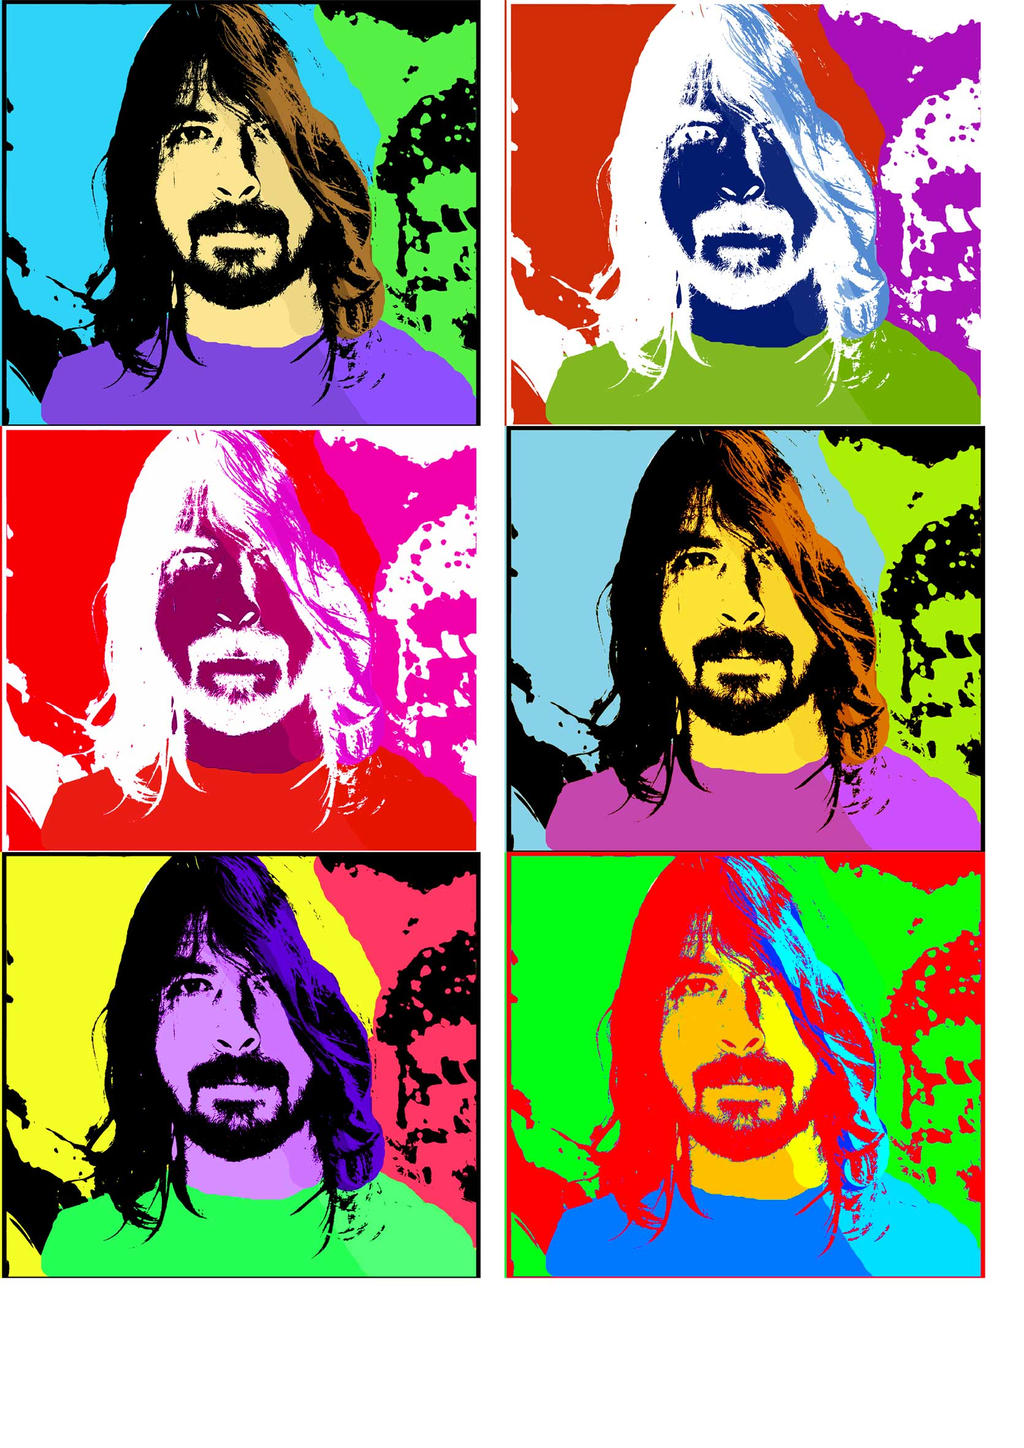 Dave Grohl pop art by ammo14 on DeviantArt